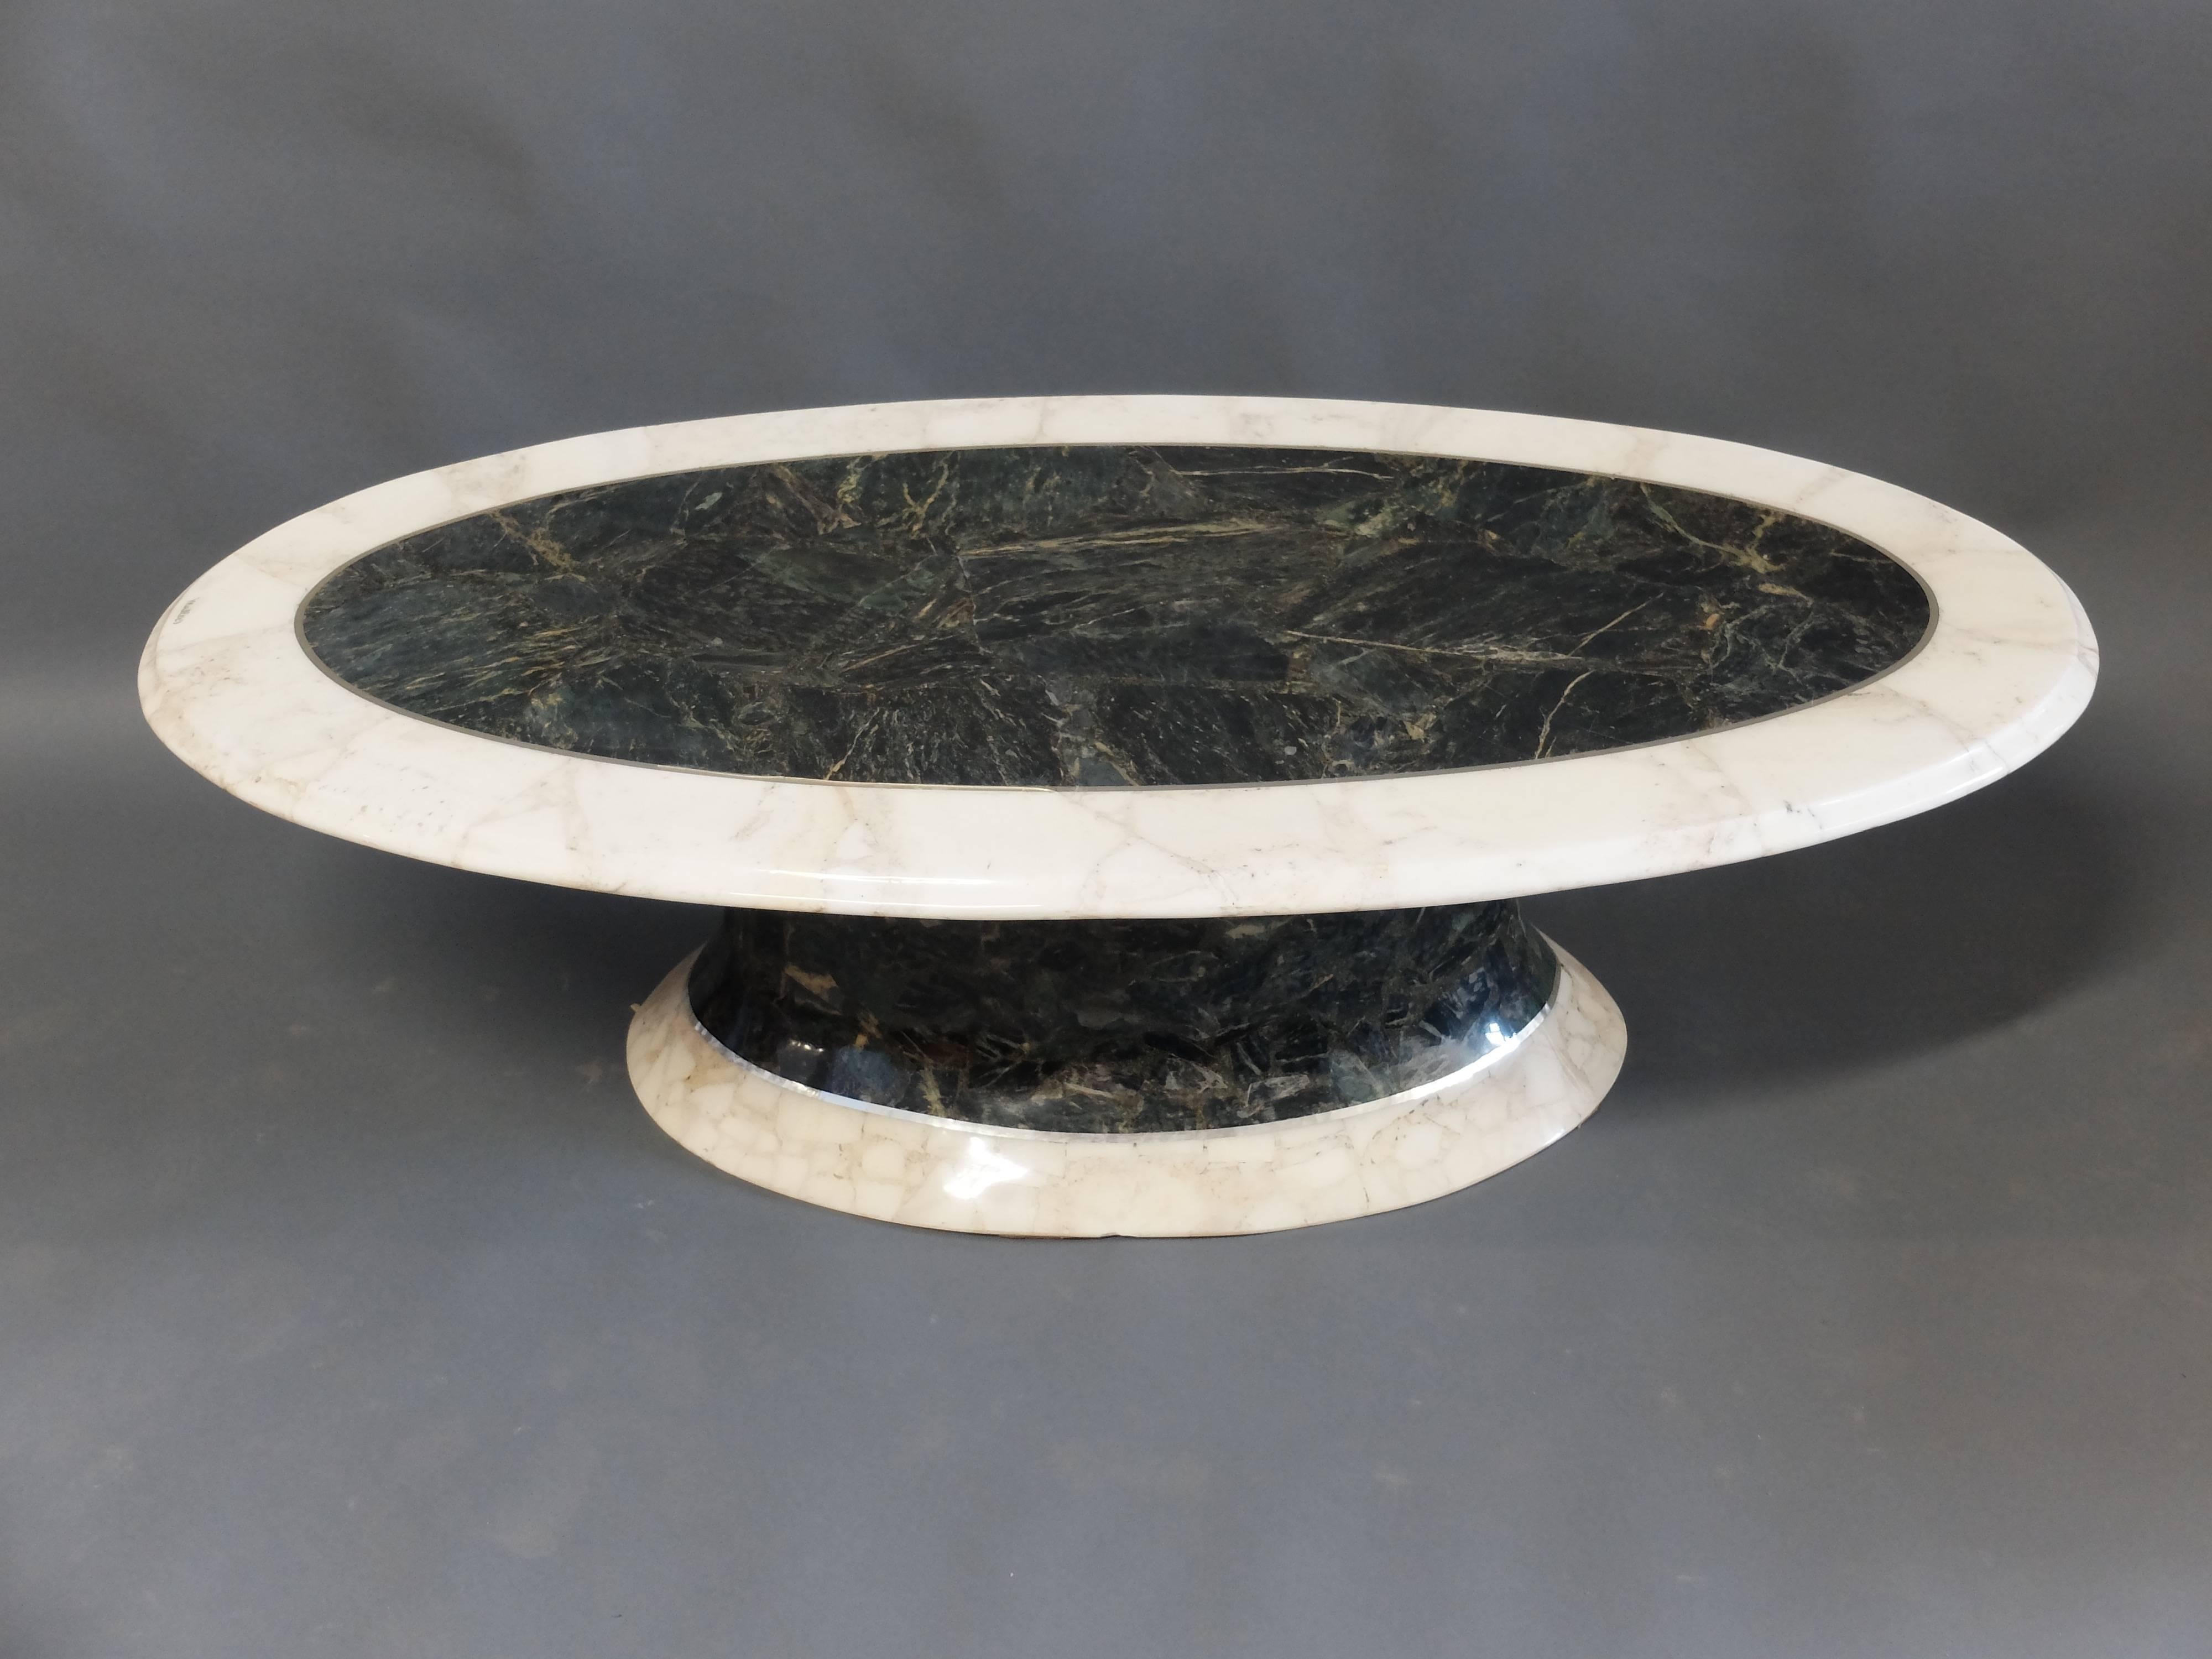 Muller of Mexico onyx coffee table
Signed 'Muller's'.